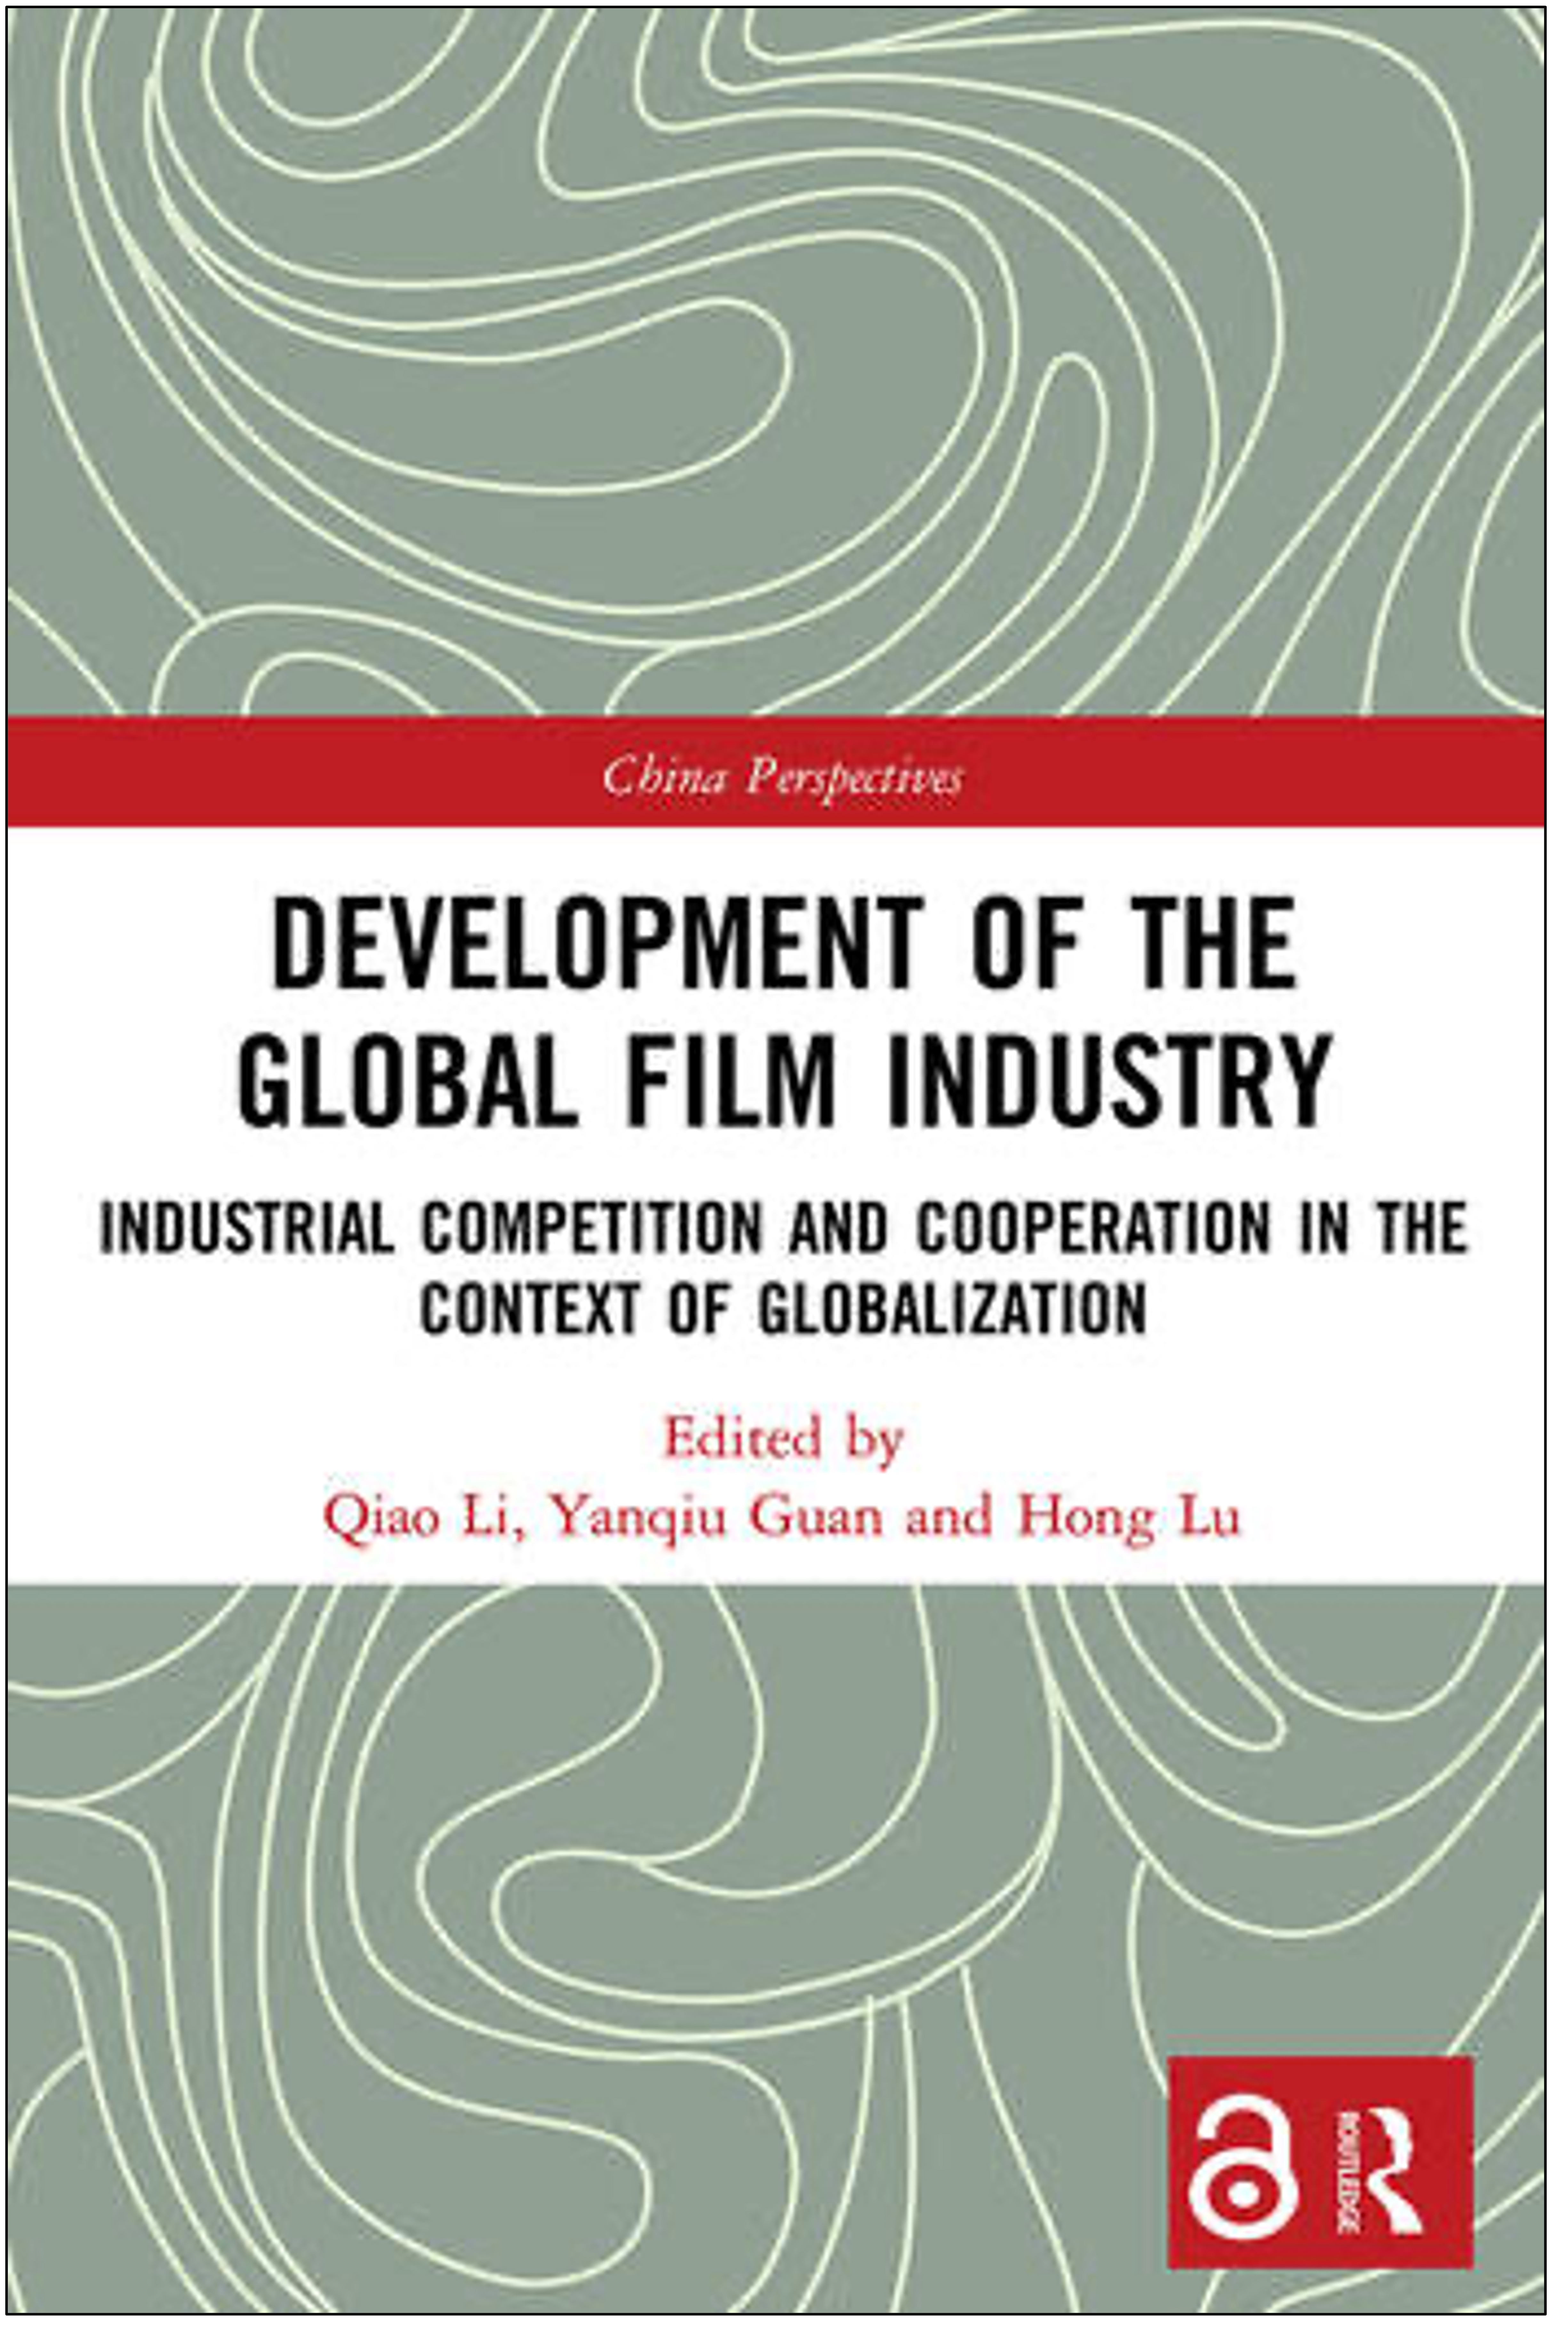 Qiao Li, Yanqiu Guan, and Hong Lu (Eds.), Development of the Global Film Industry: Industrial Competition and Cooperation in the Context of Globalization